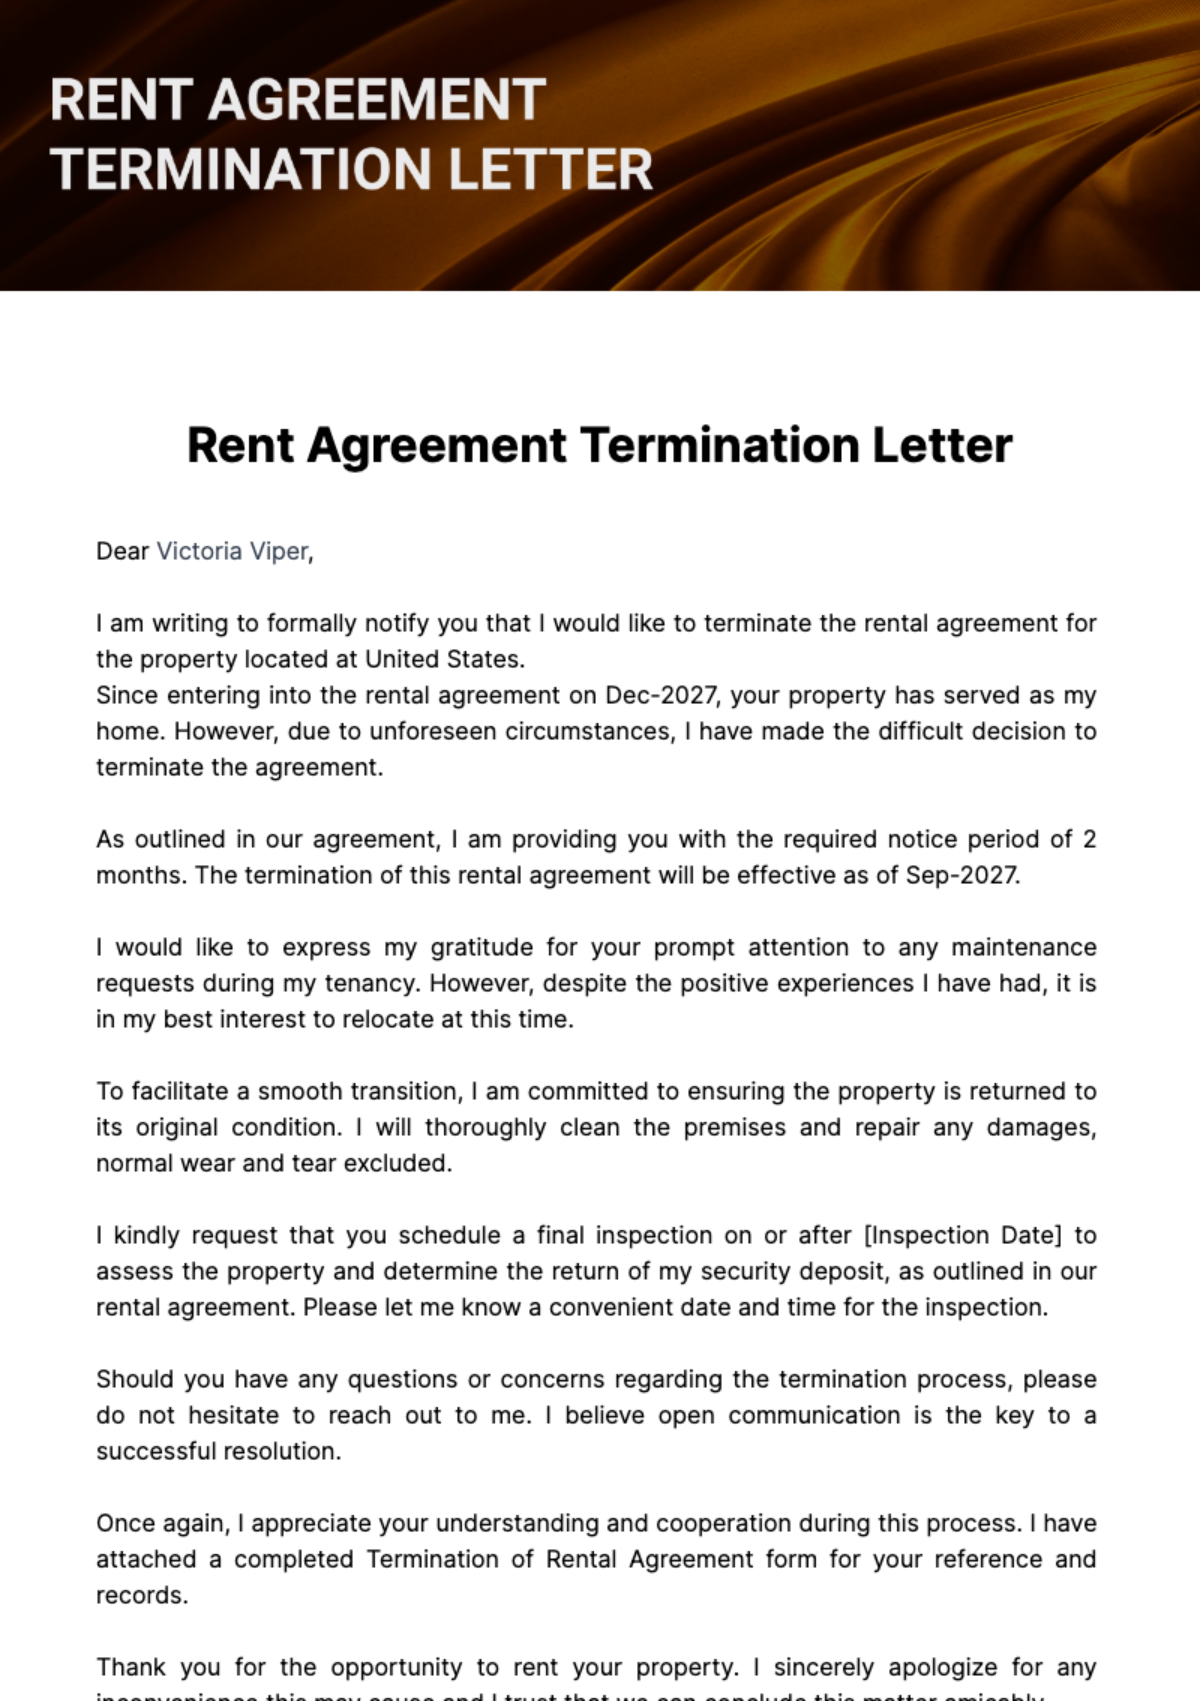 Free Rent Agreement Termination Letter Template